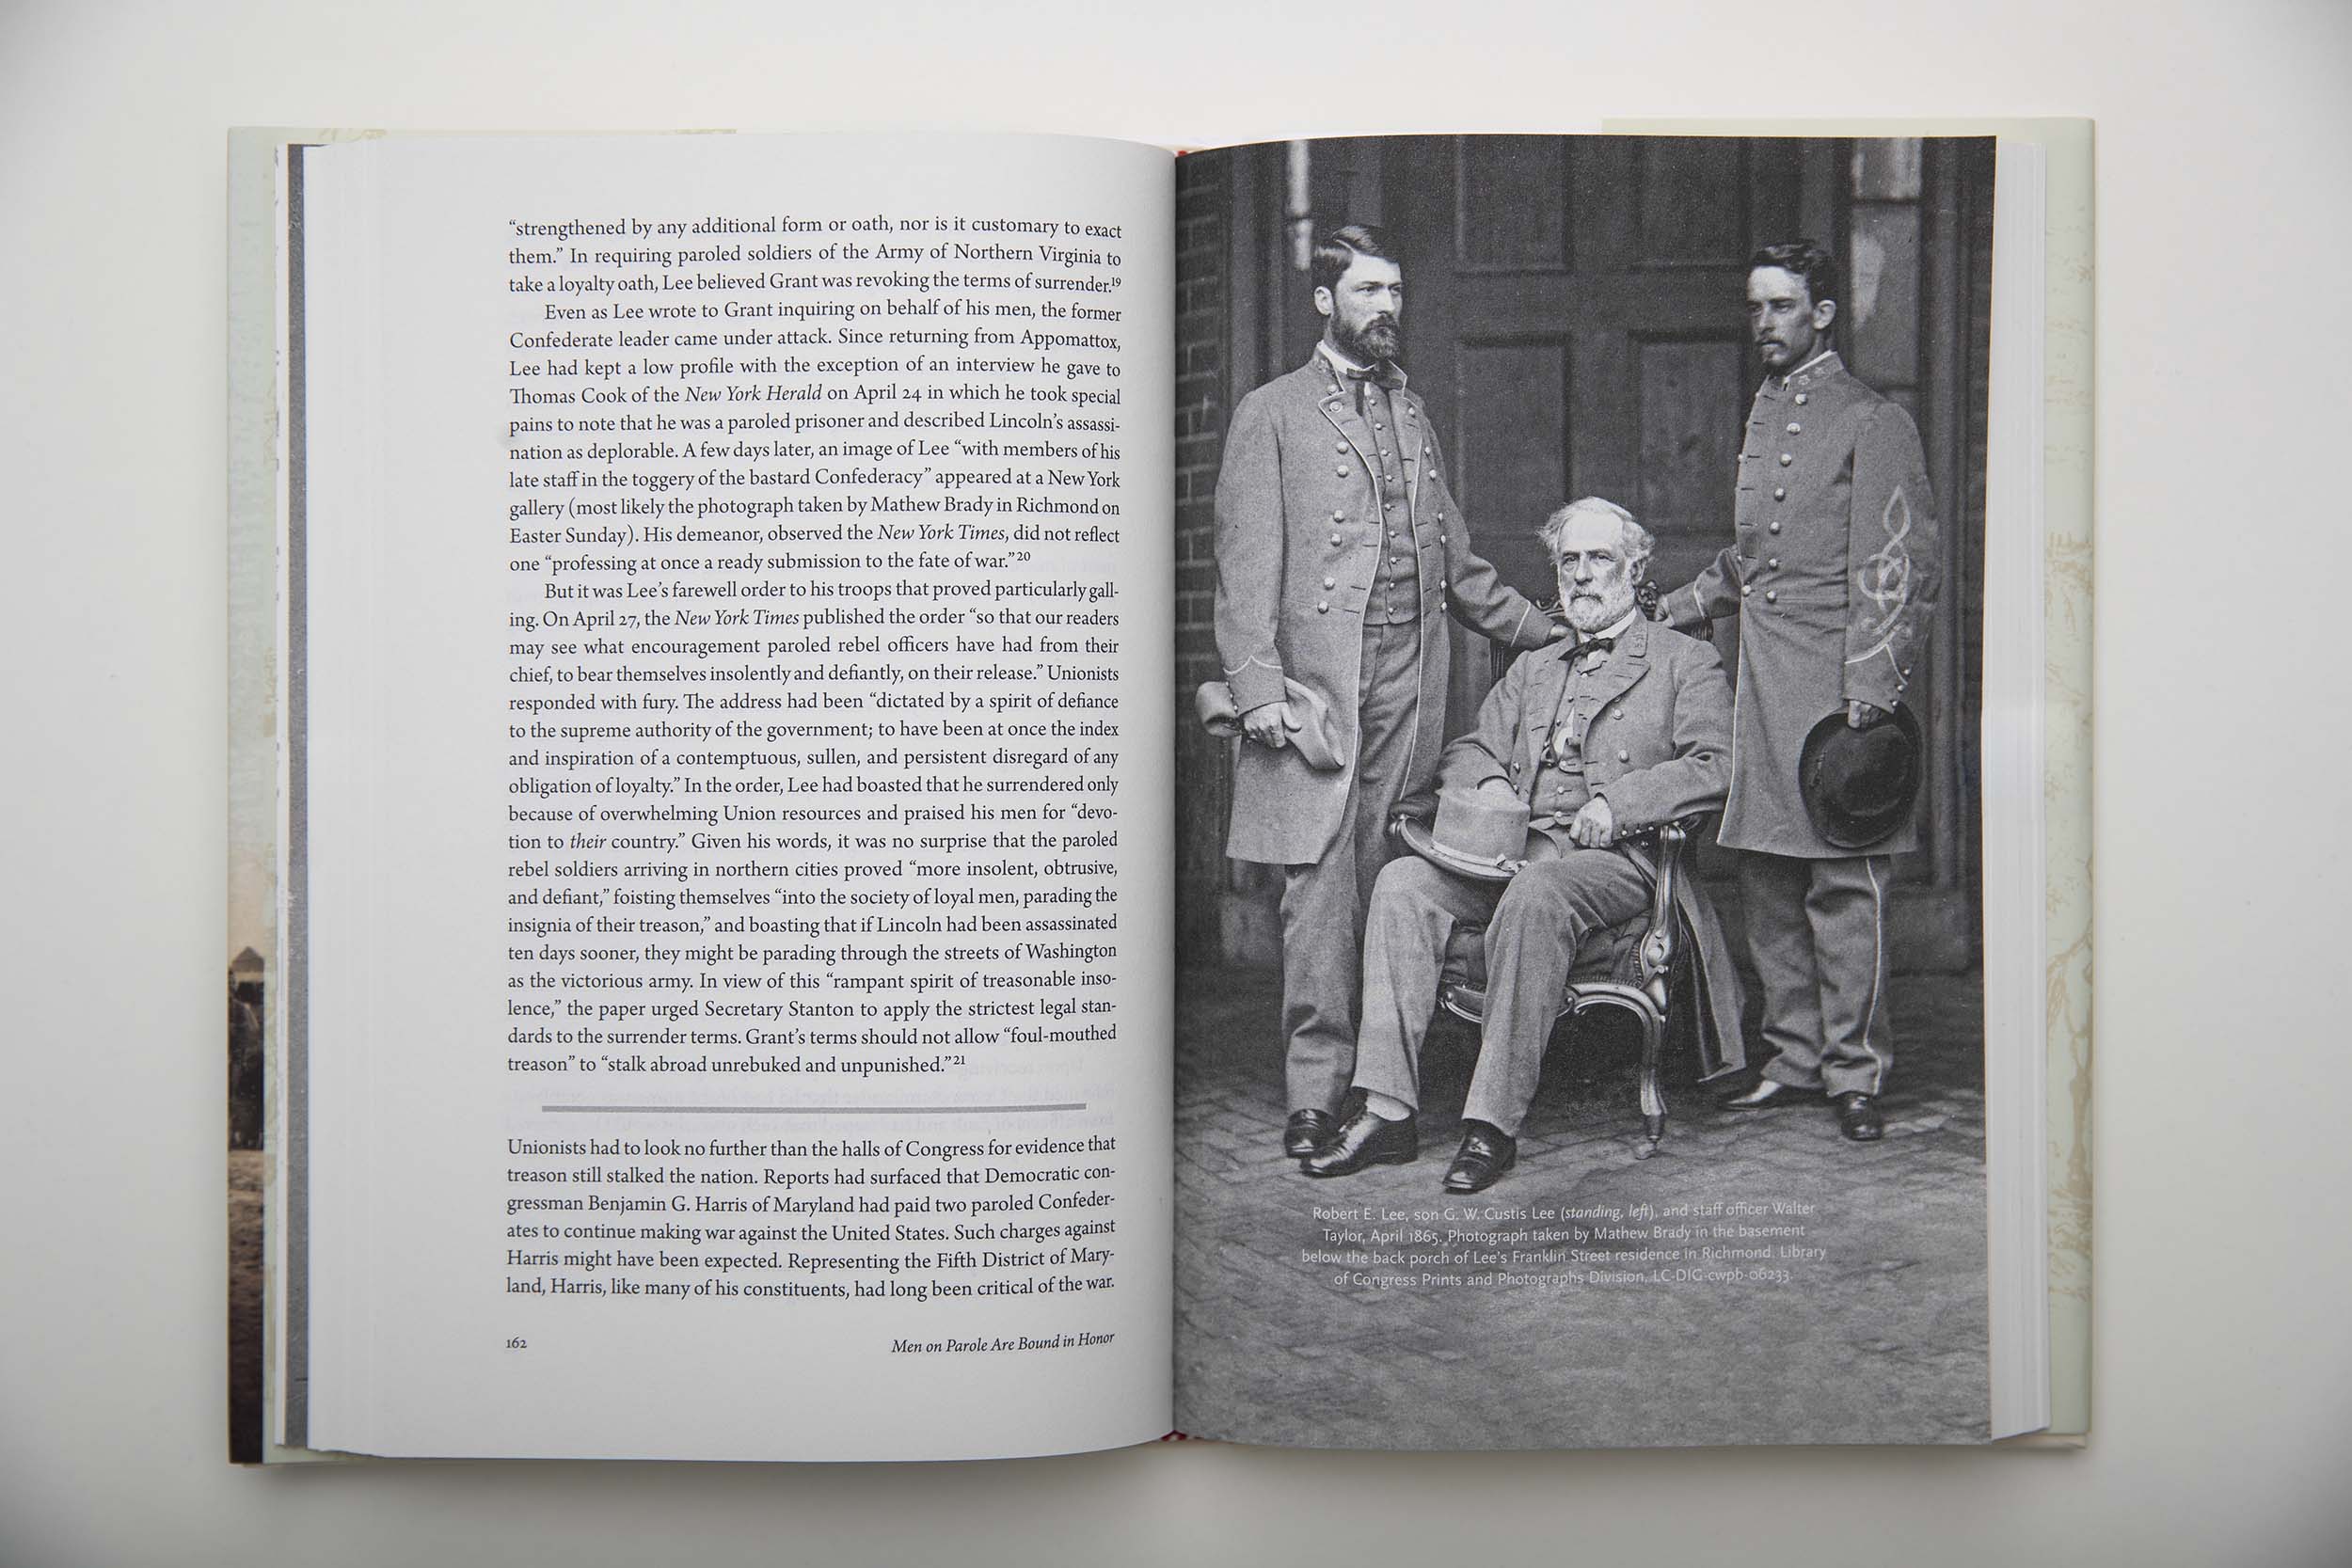 picture in a book of Gen. Robert E. Lee, flanked by his son G. W. Custis Lee, left, and staff officer Walter Taylor, in April 1865.